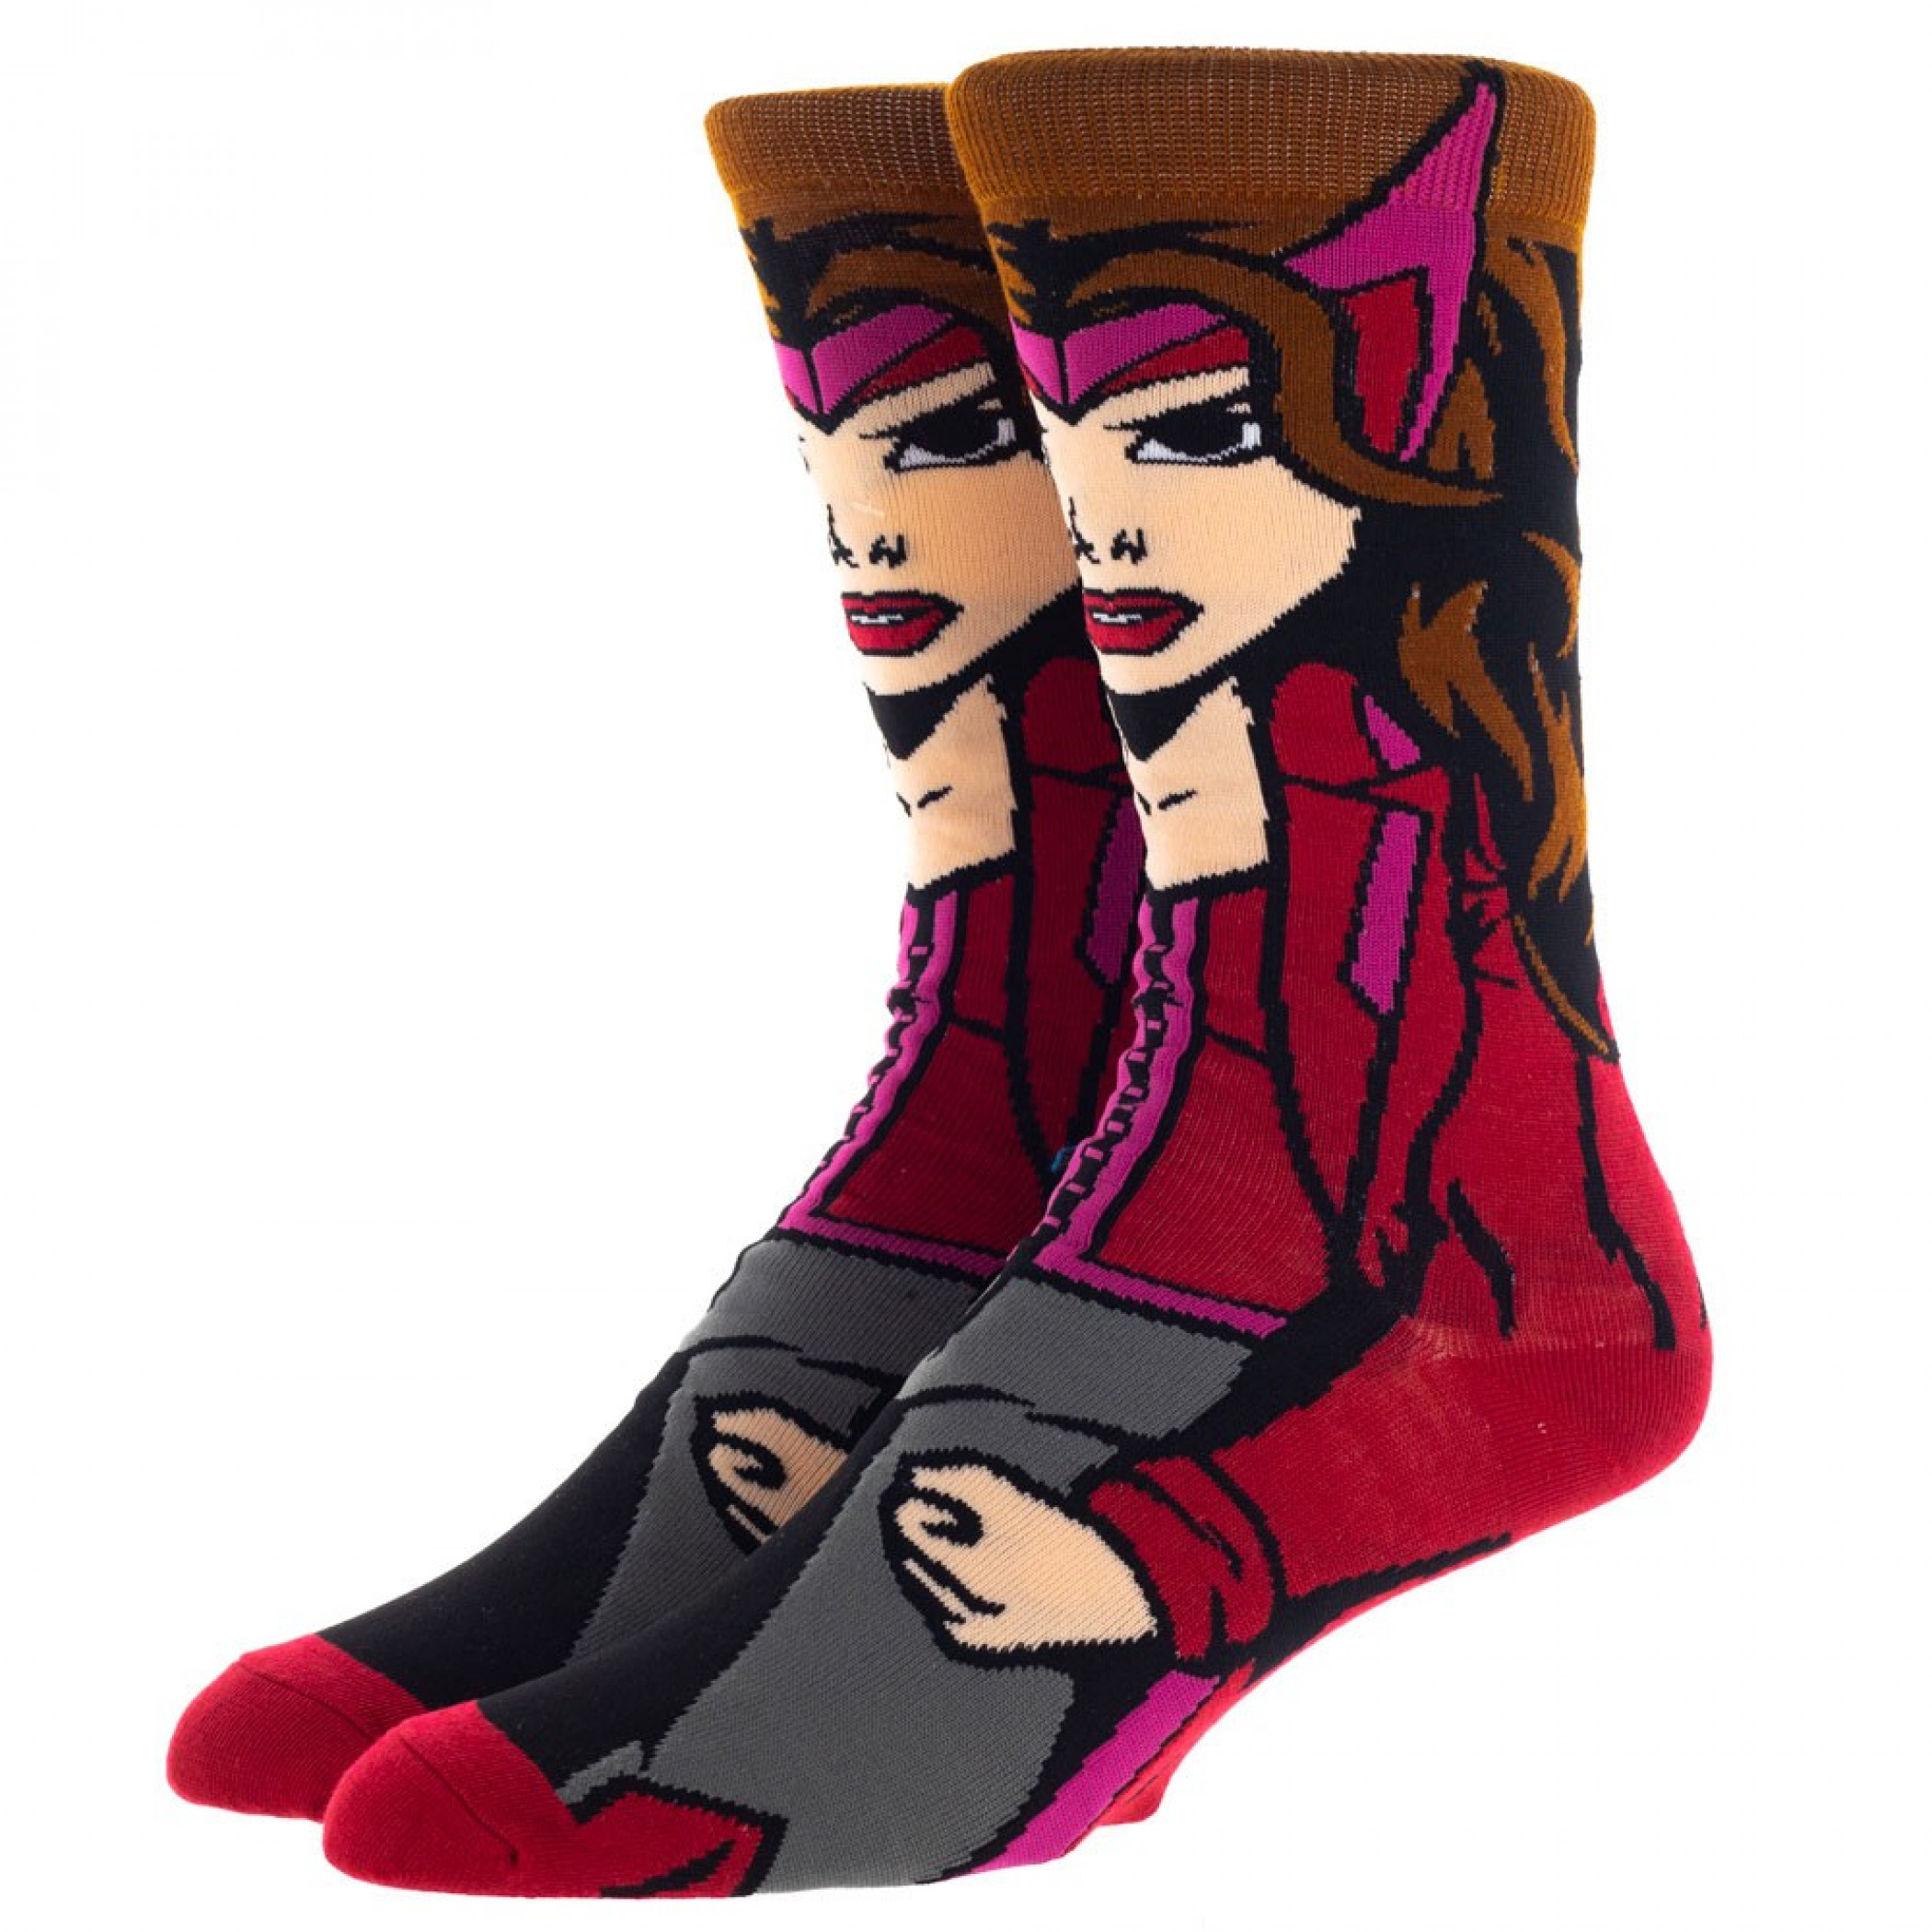 Marvel Avengers Scarlet Witch 360 Character Crew Socks